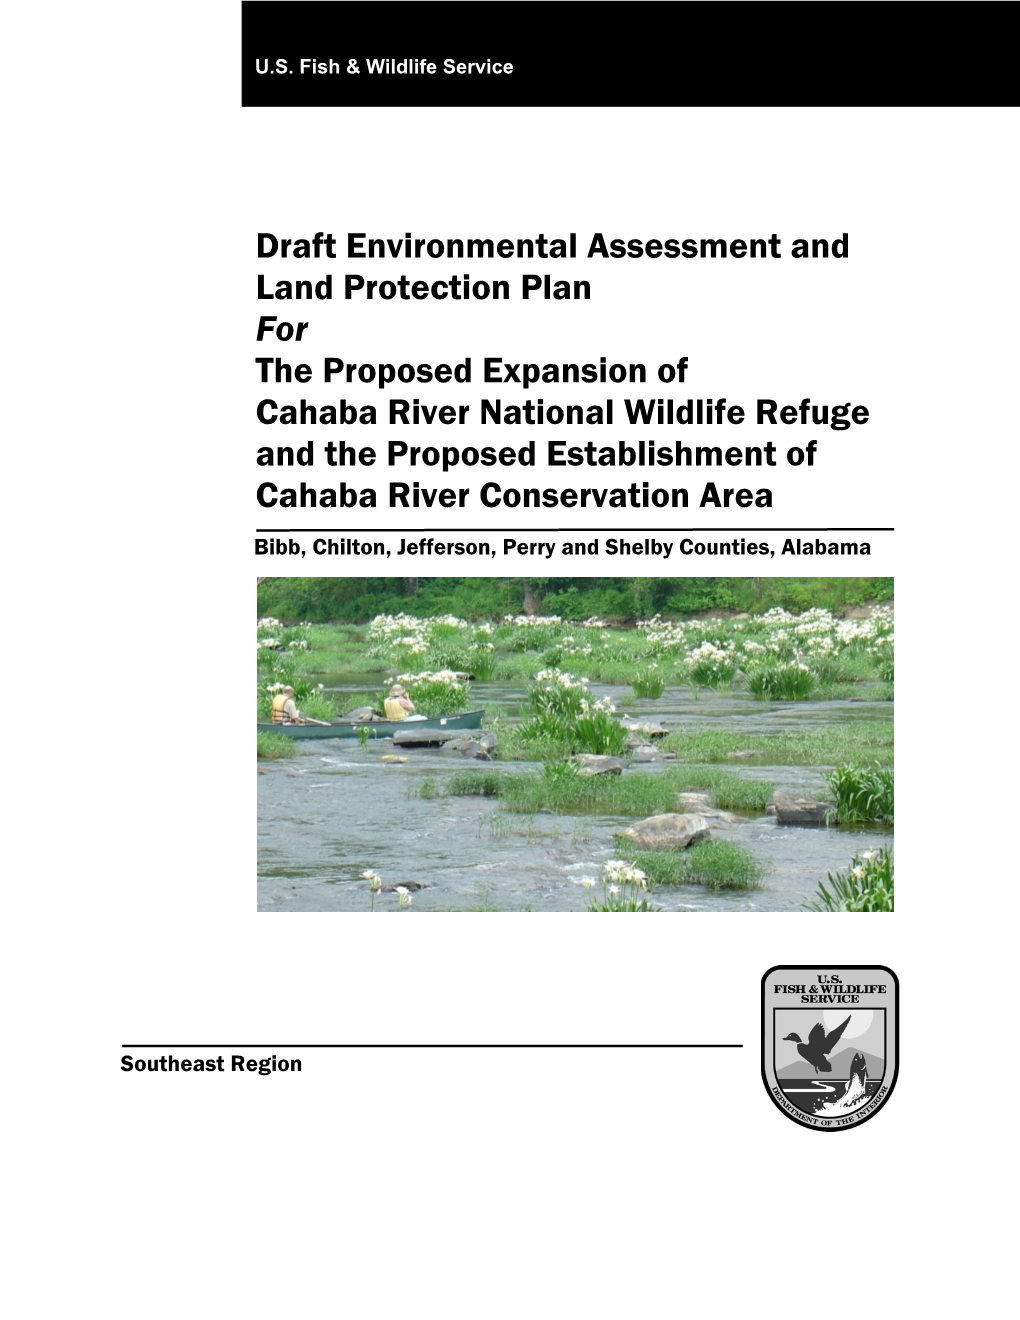 Draft Environmental Assessment and Land Protection Plan for The